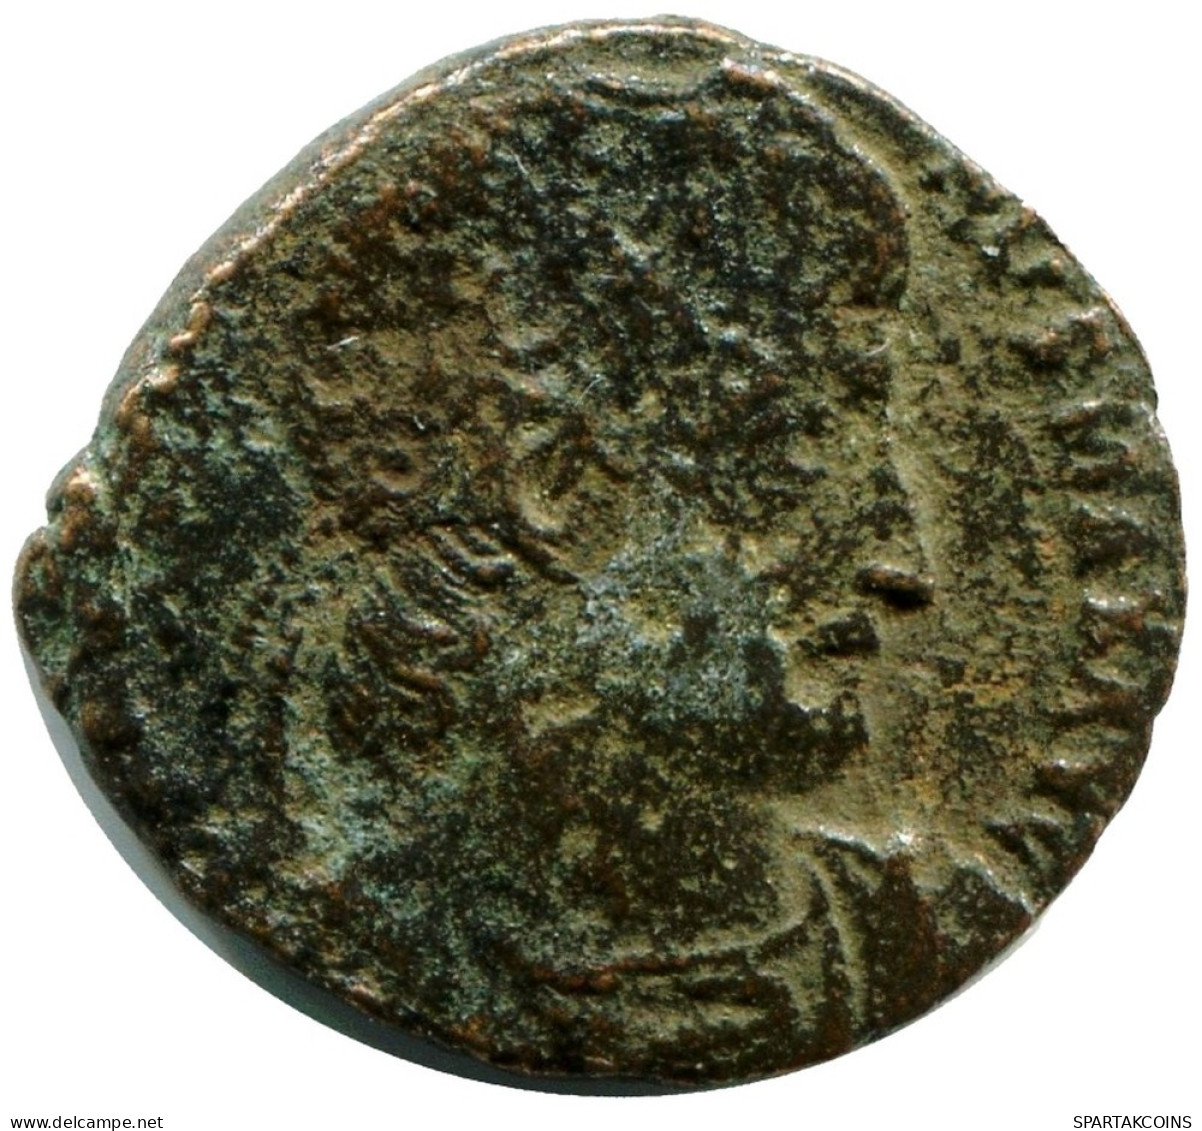 CONSTANTINE I MINTED IN ROME ITALY FROM THE ROYAL ONTARIO MUSEUM #ANC11184.14.D.A - L'Empire Chrétien (307 à 363)